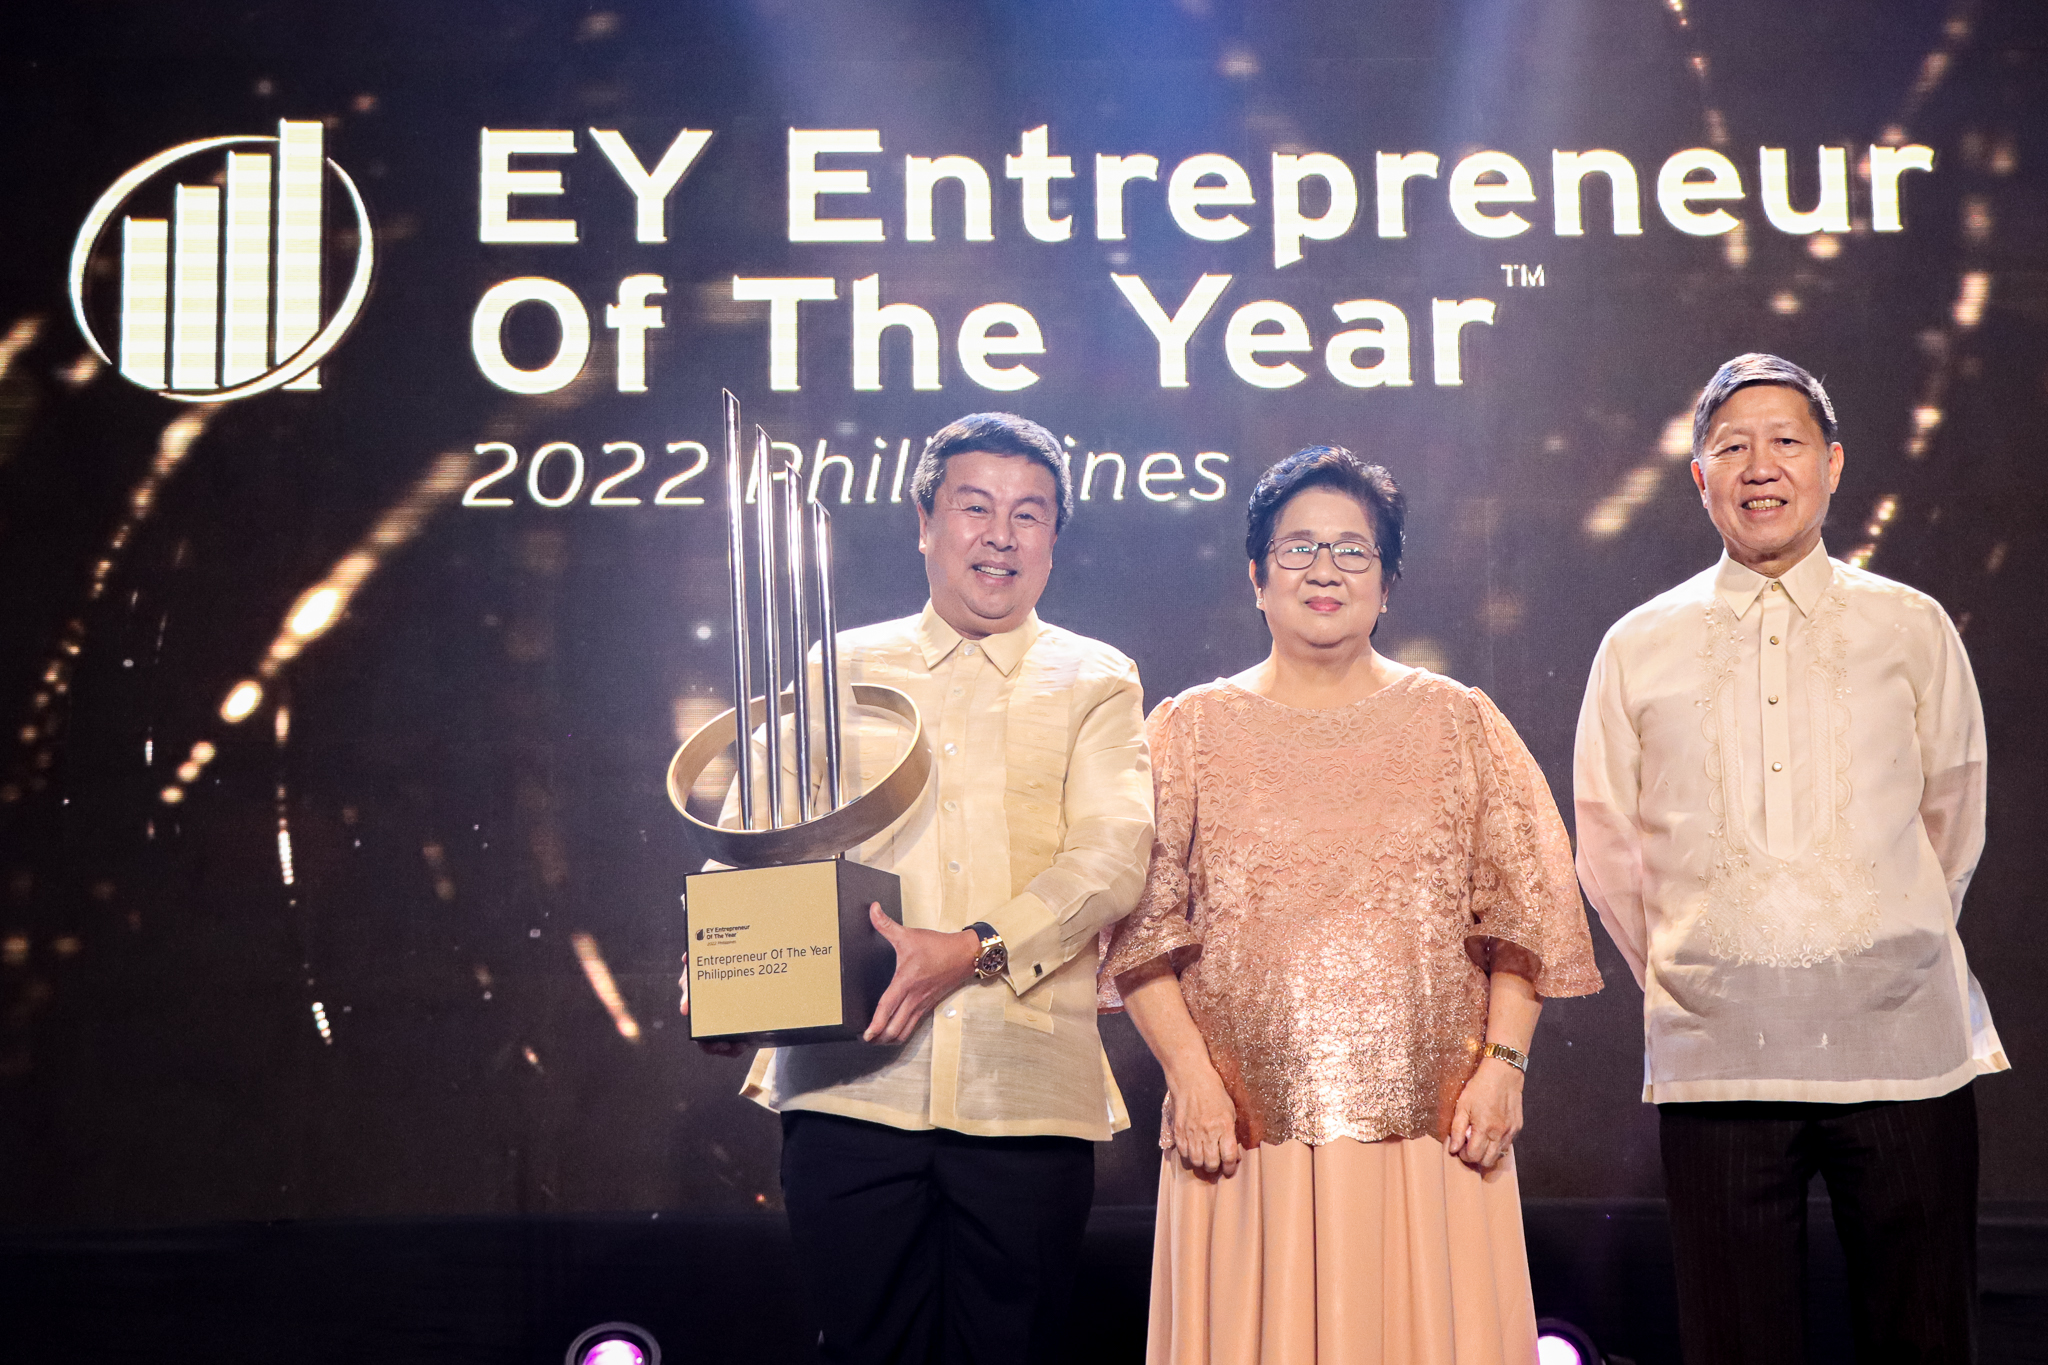 Converge CEO Dennis Anthony Uy is EY Entrepreneur of the Year 2022